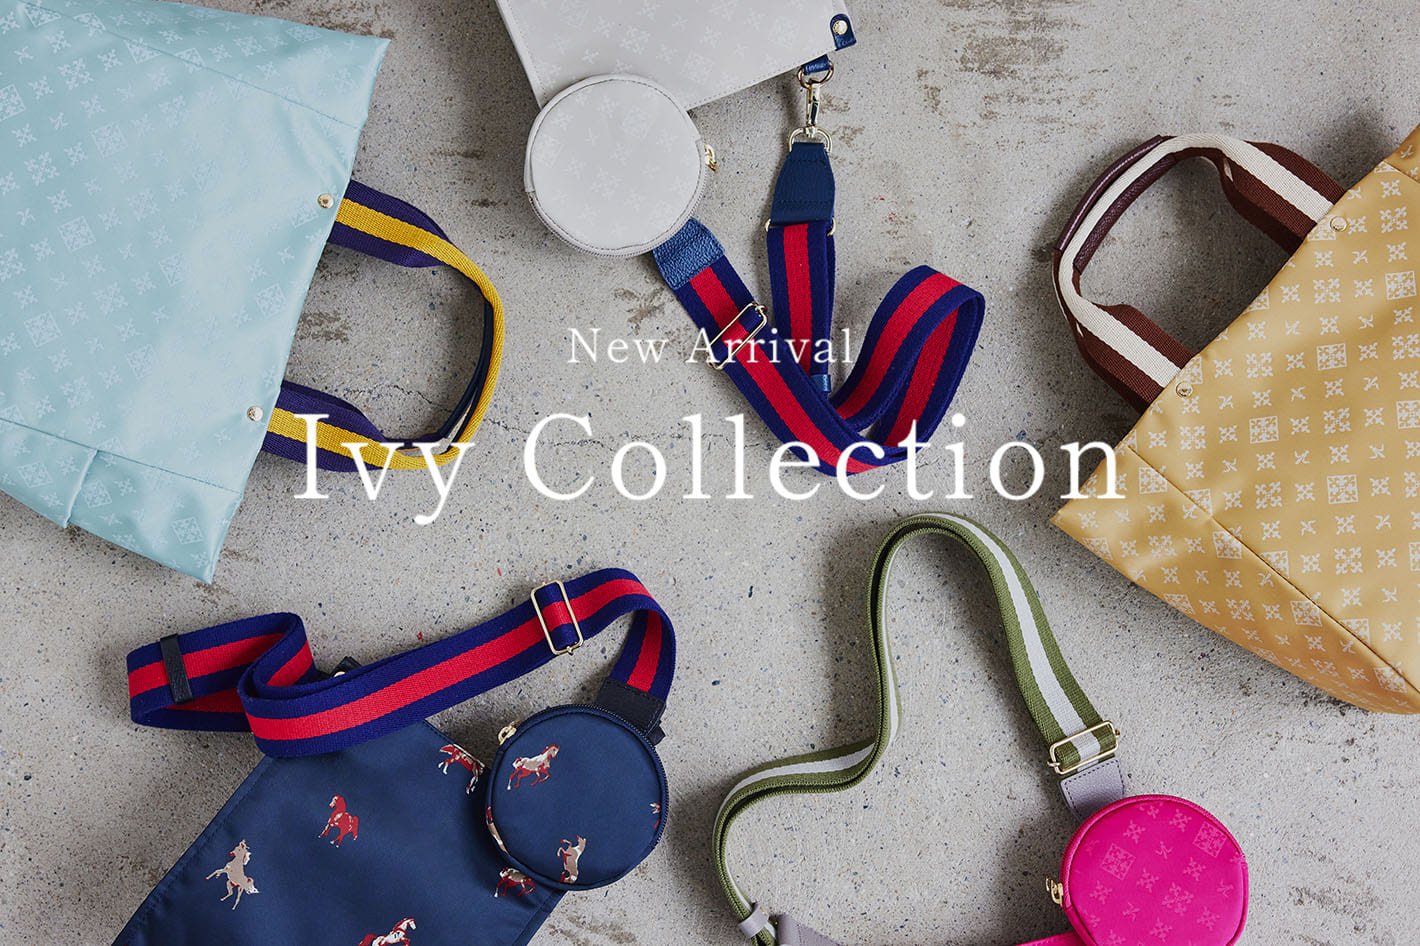 russet ◆New Arrival◆Ivy Collection